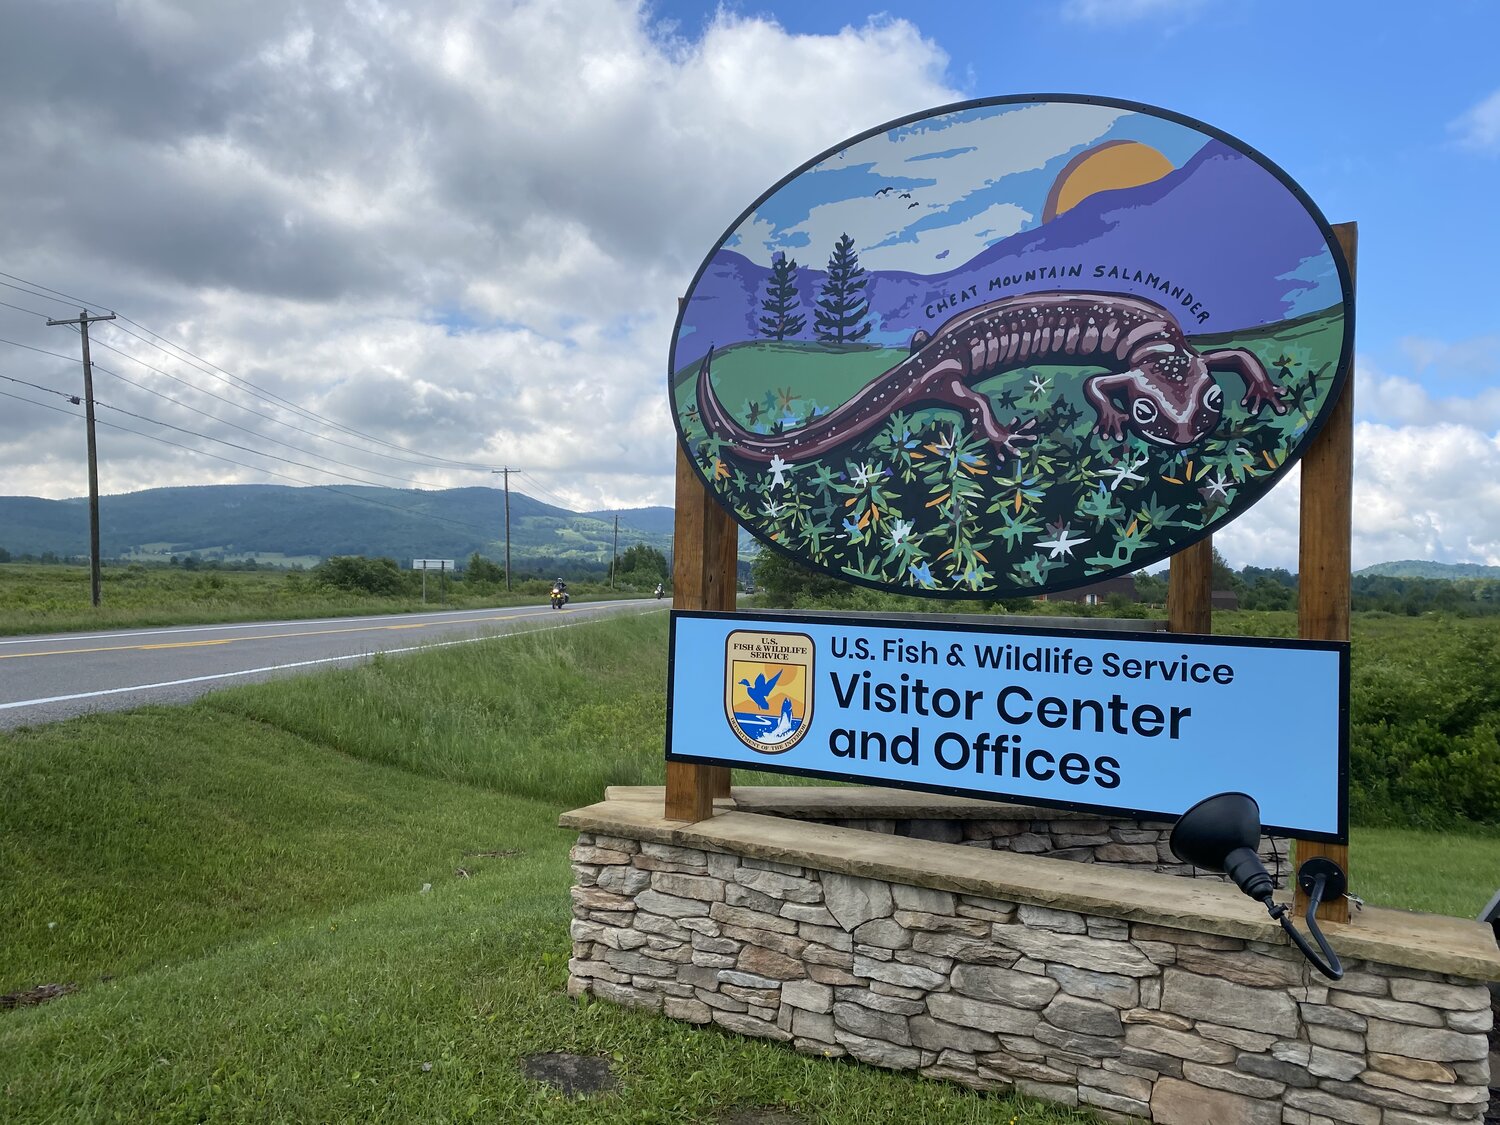 Hand-illustrated sign design that I created for the brand new USFWS Visitor Center in Canaan Valley, WV.